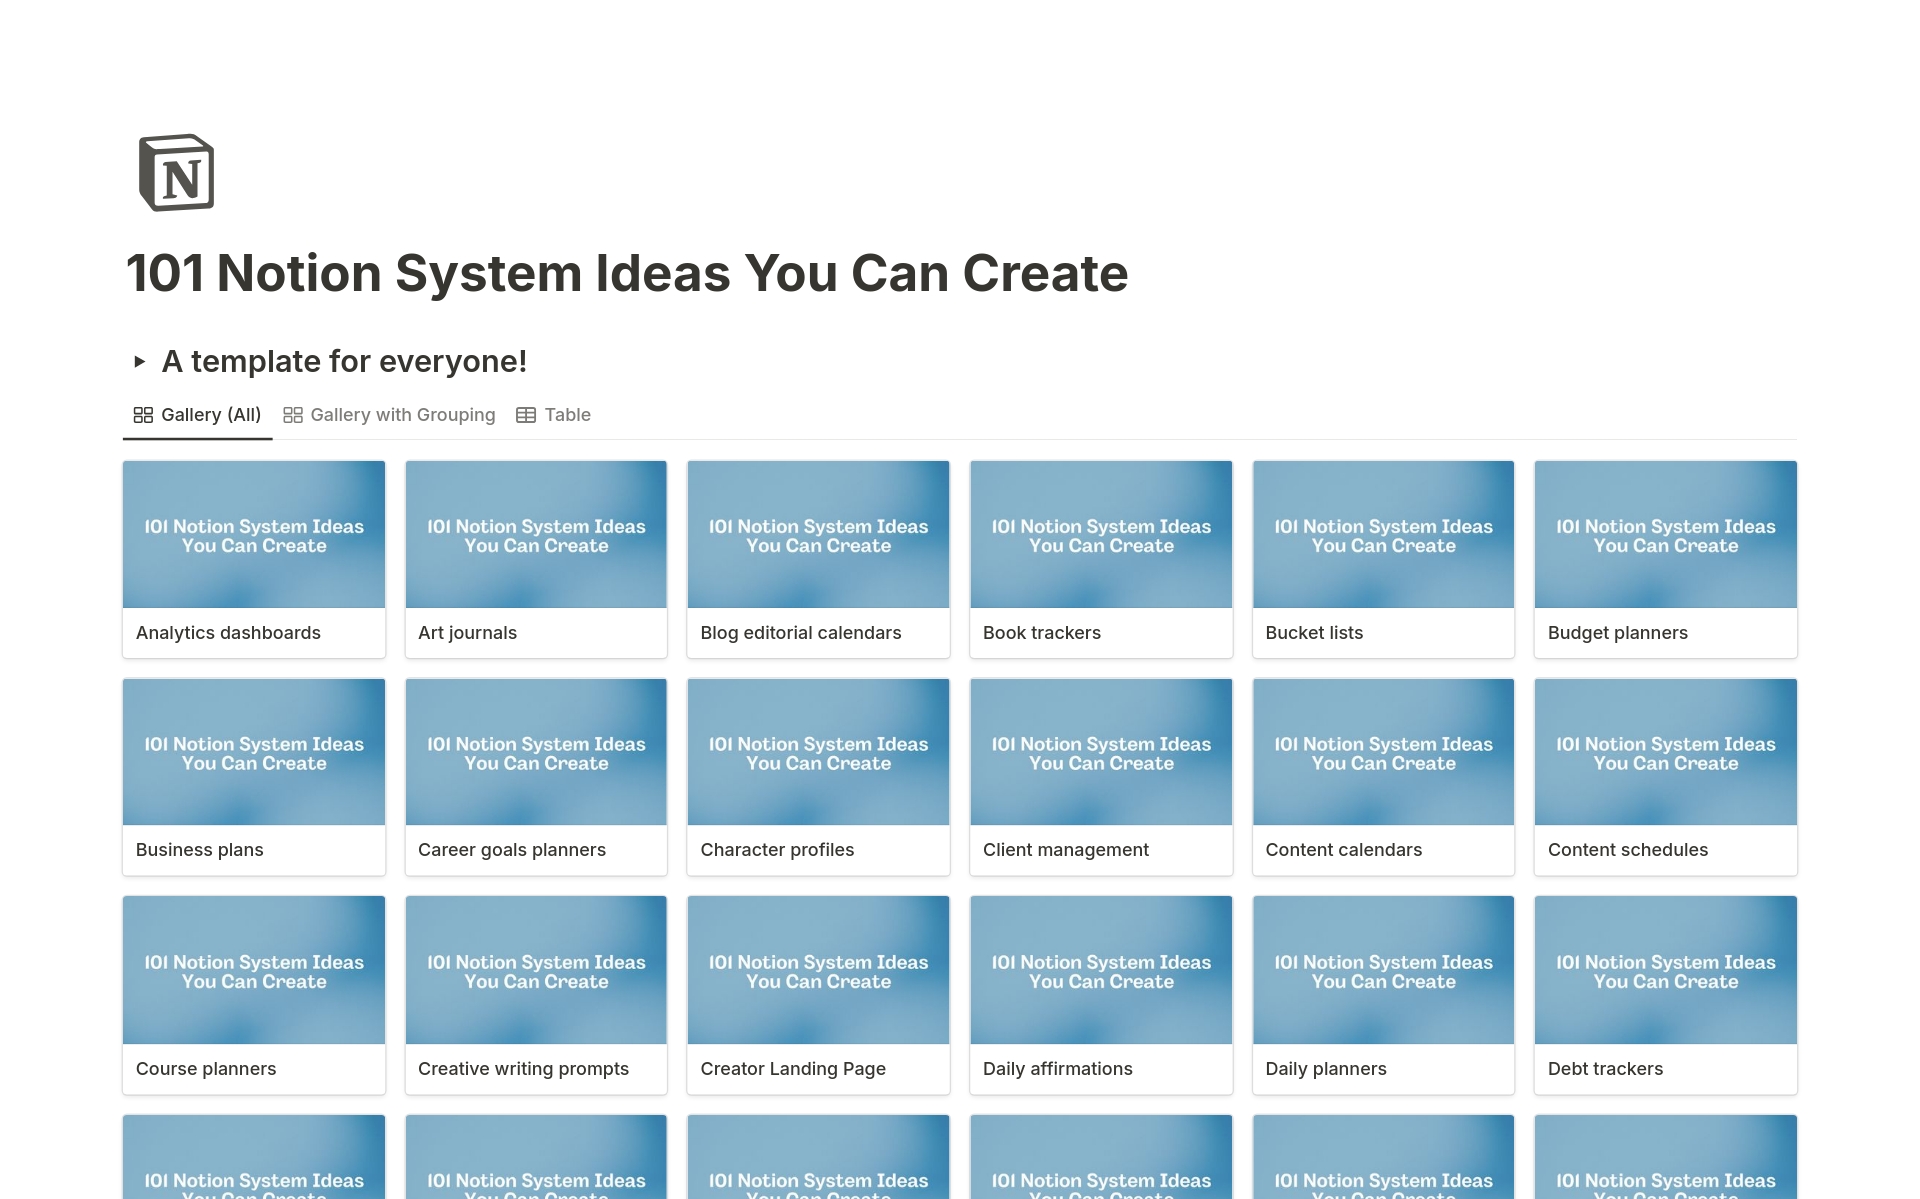 A comprehensive list of 101 System Ideas, covering a wide range of needs and uses for almost any scenario you can imagine.